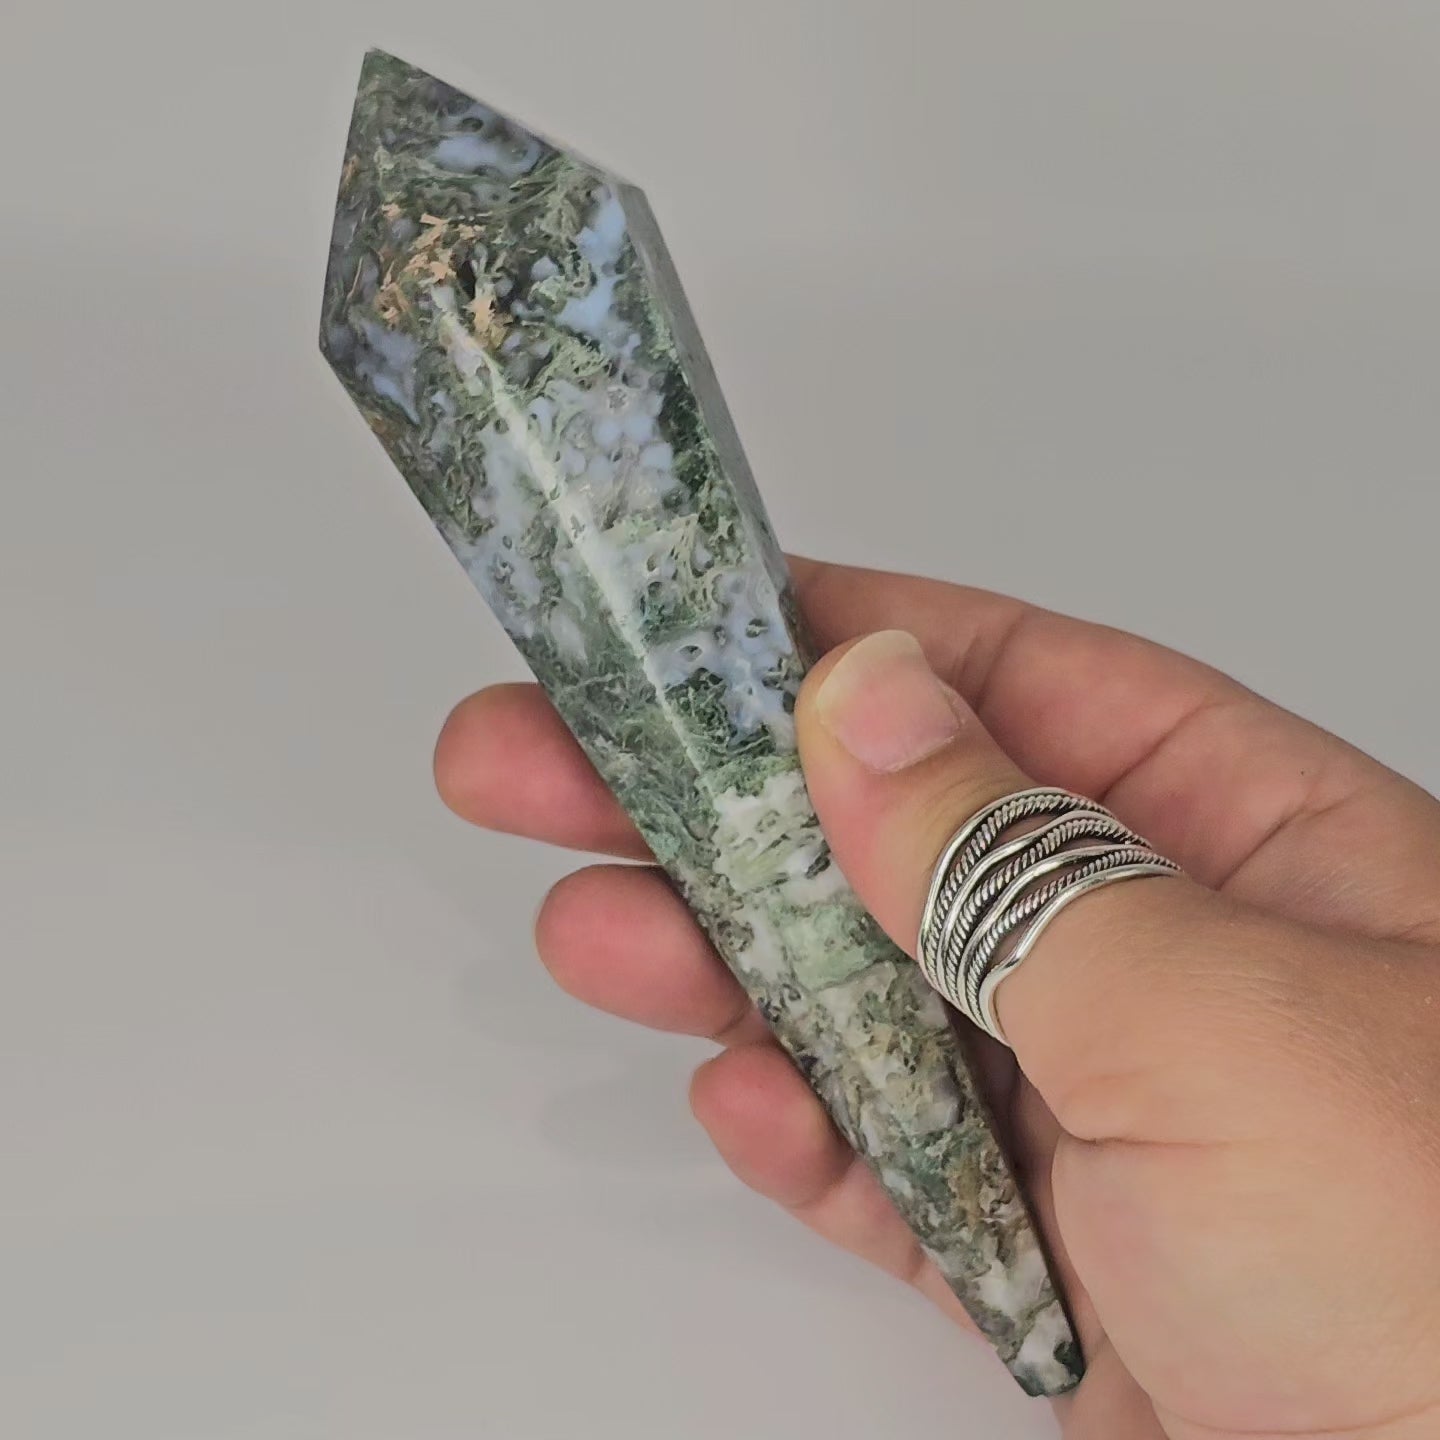 Stunning Moss Agate wand with beautiful blue Chalcedony and Quartz druzy pocket.